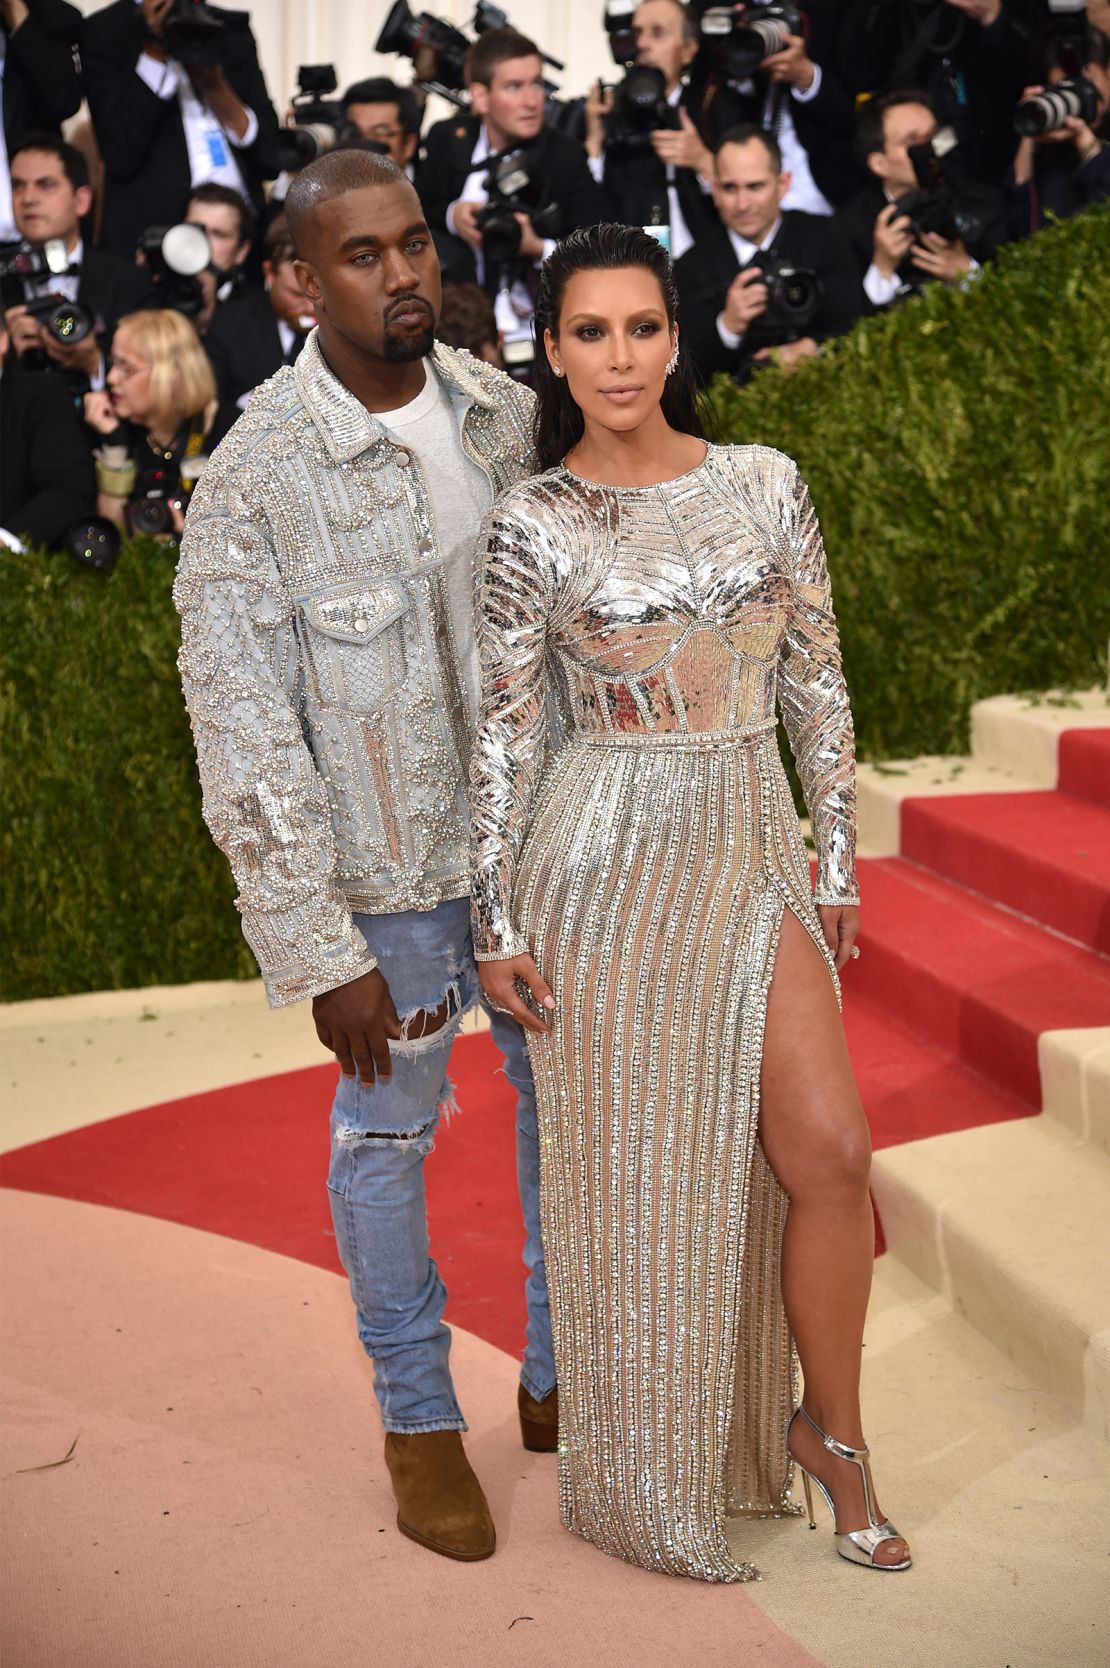 Kanye West and Kim Kardashian at the Costume Institute Gala at Metropolitan Museum of Art on May 2, 2016 in New York City.